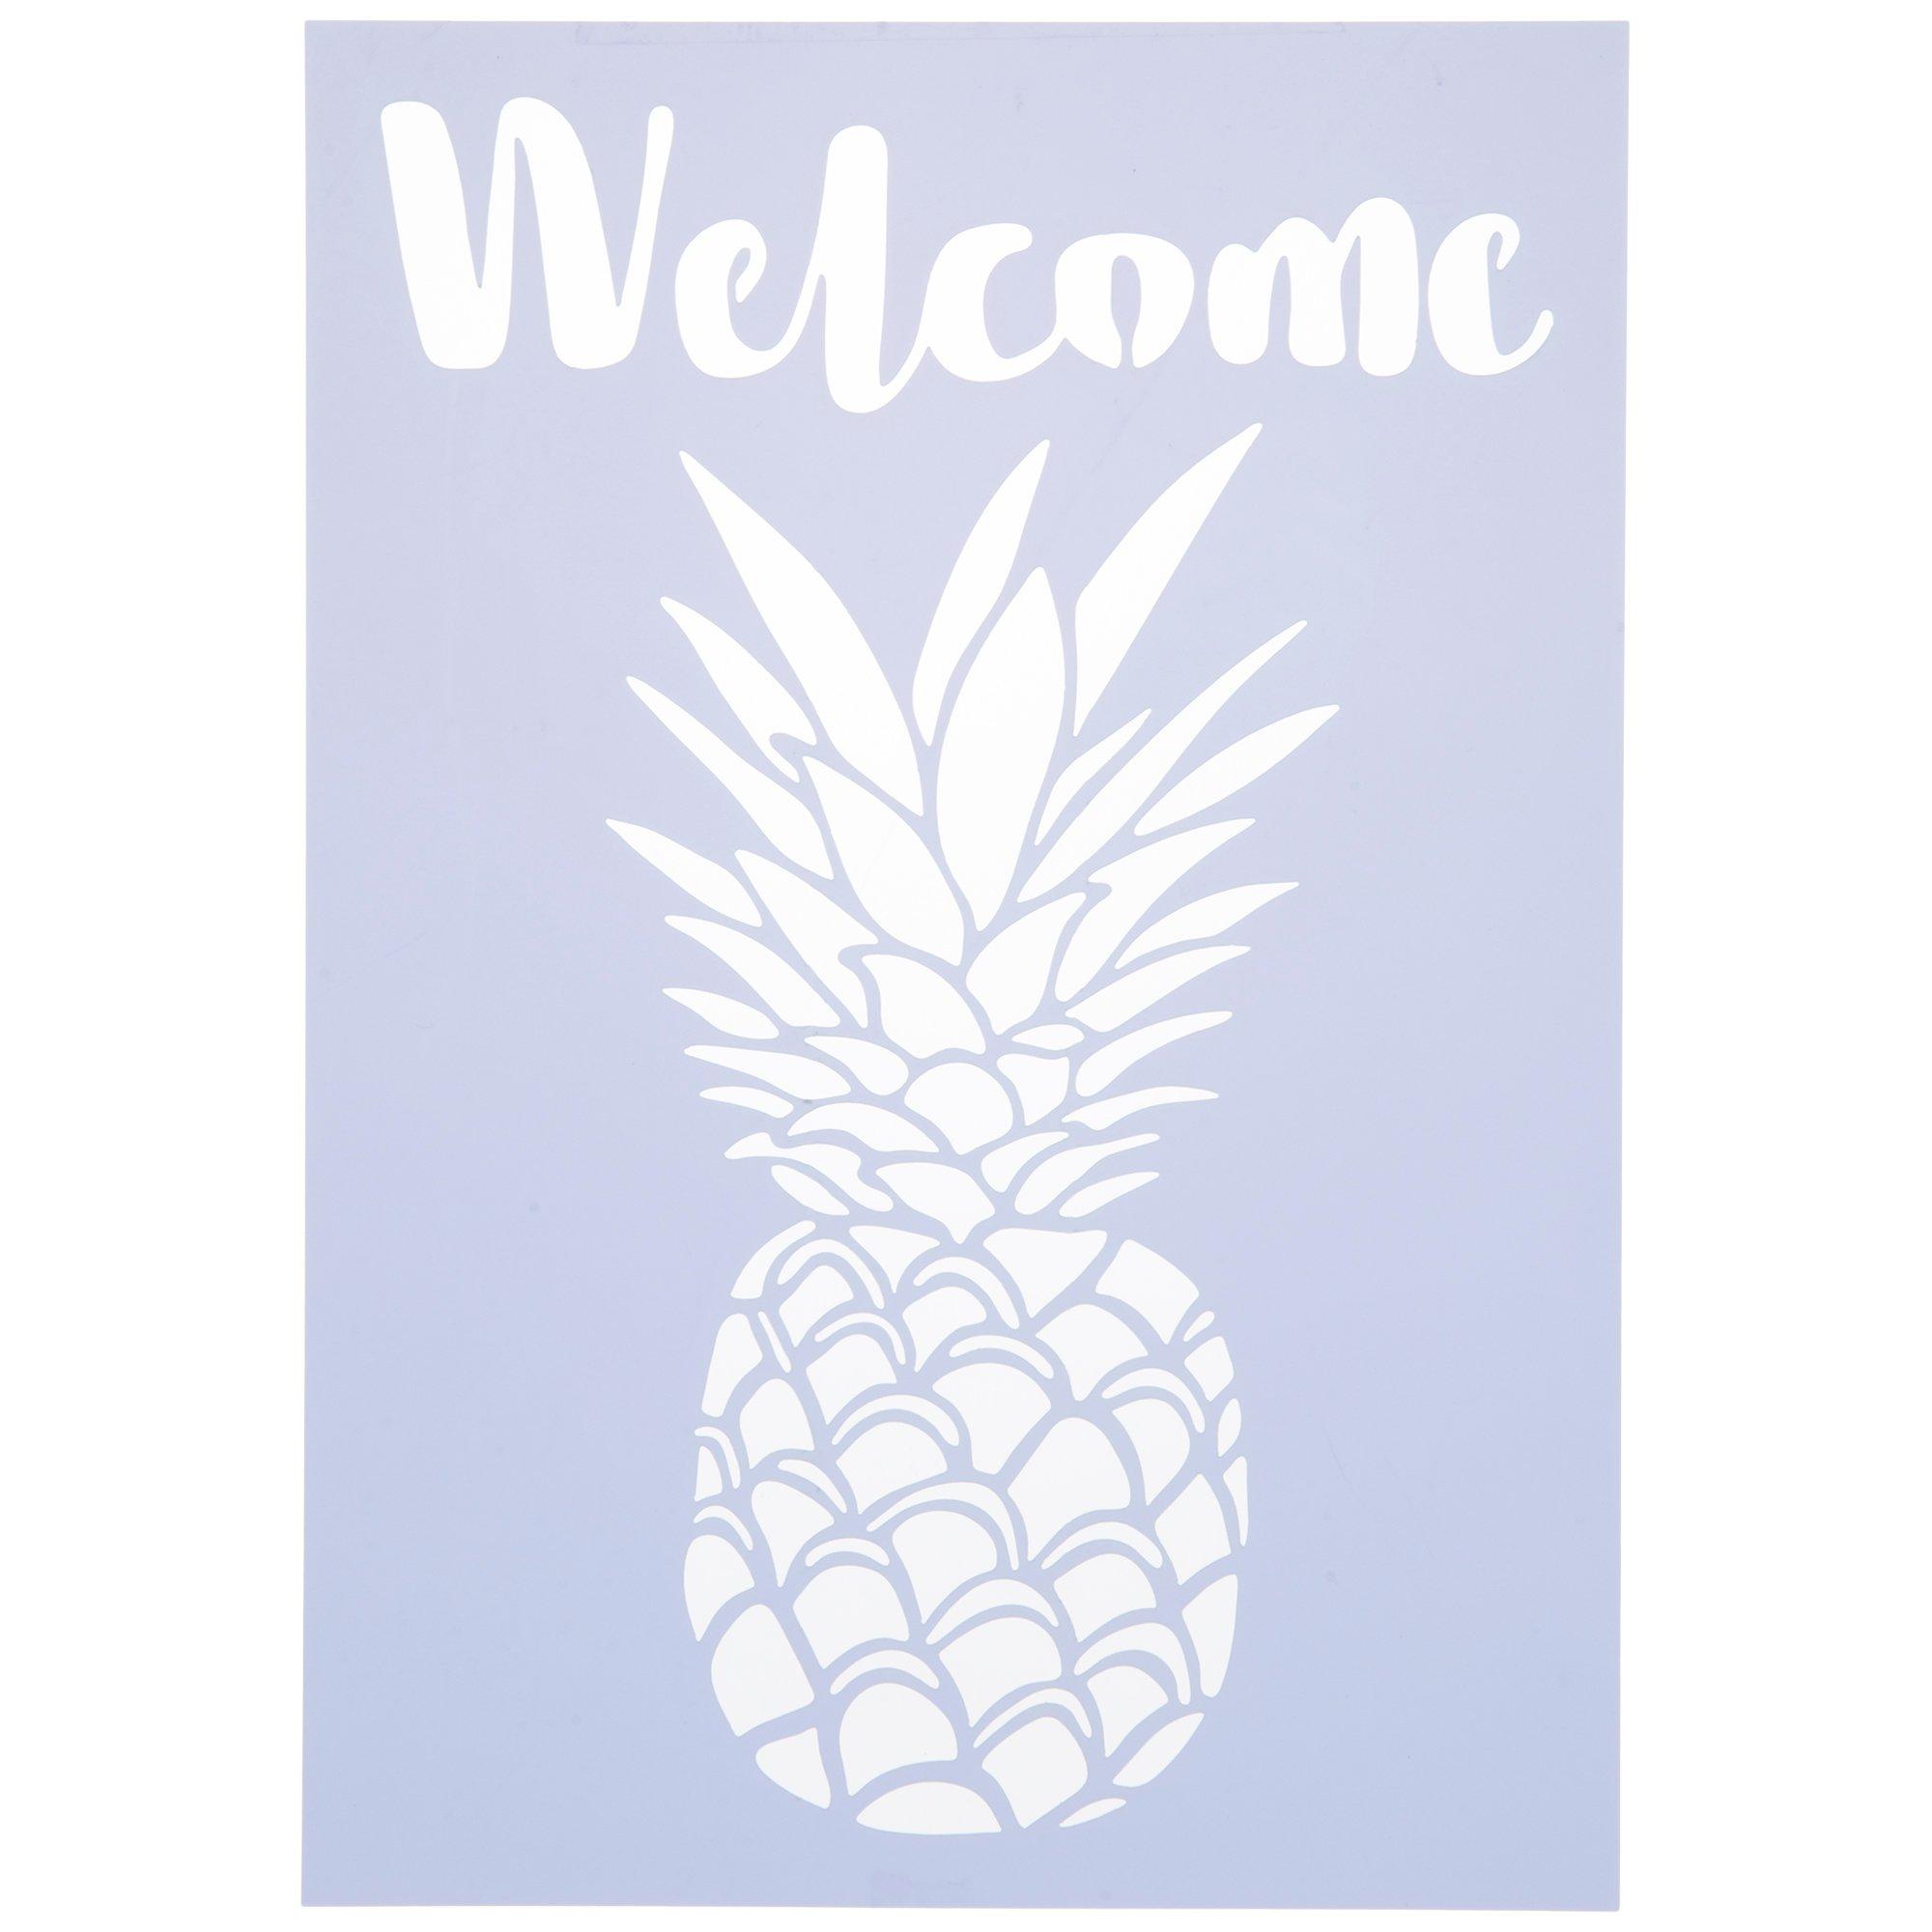 Welcome & Blessed Adhesive Stencil, Hobby Lobby